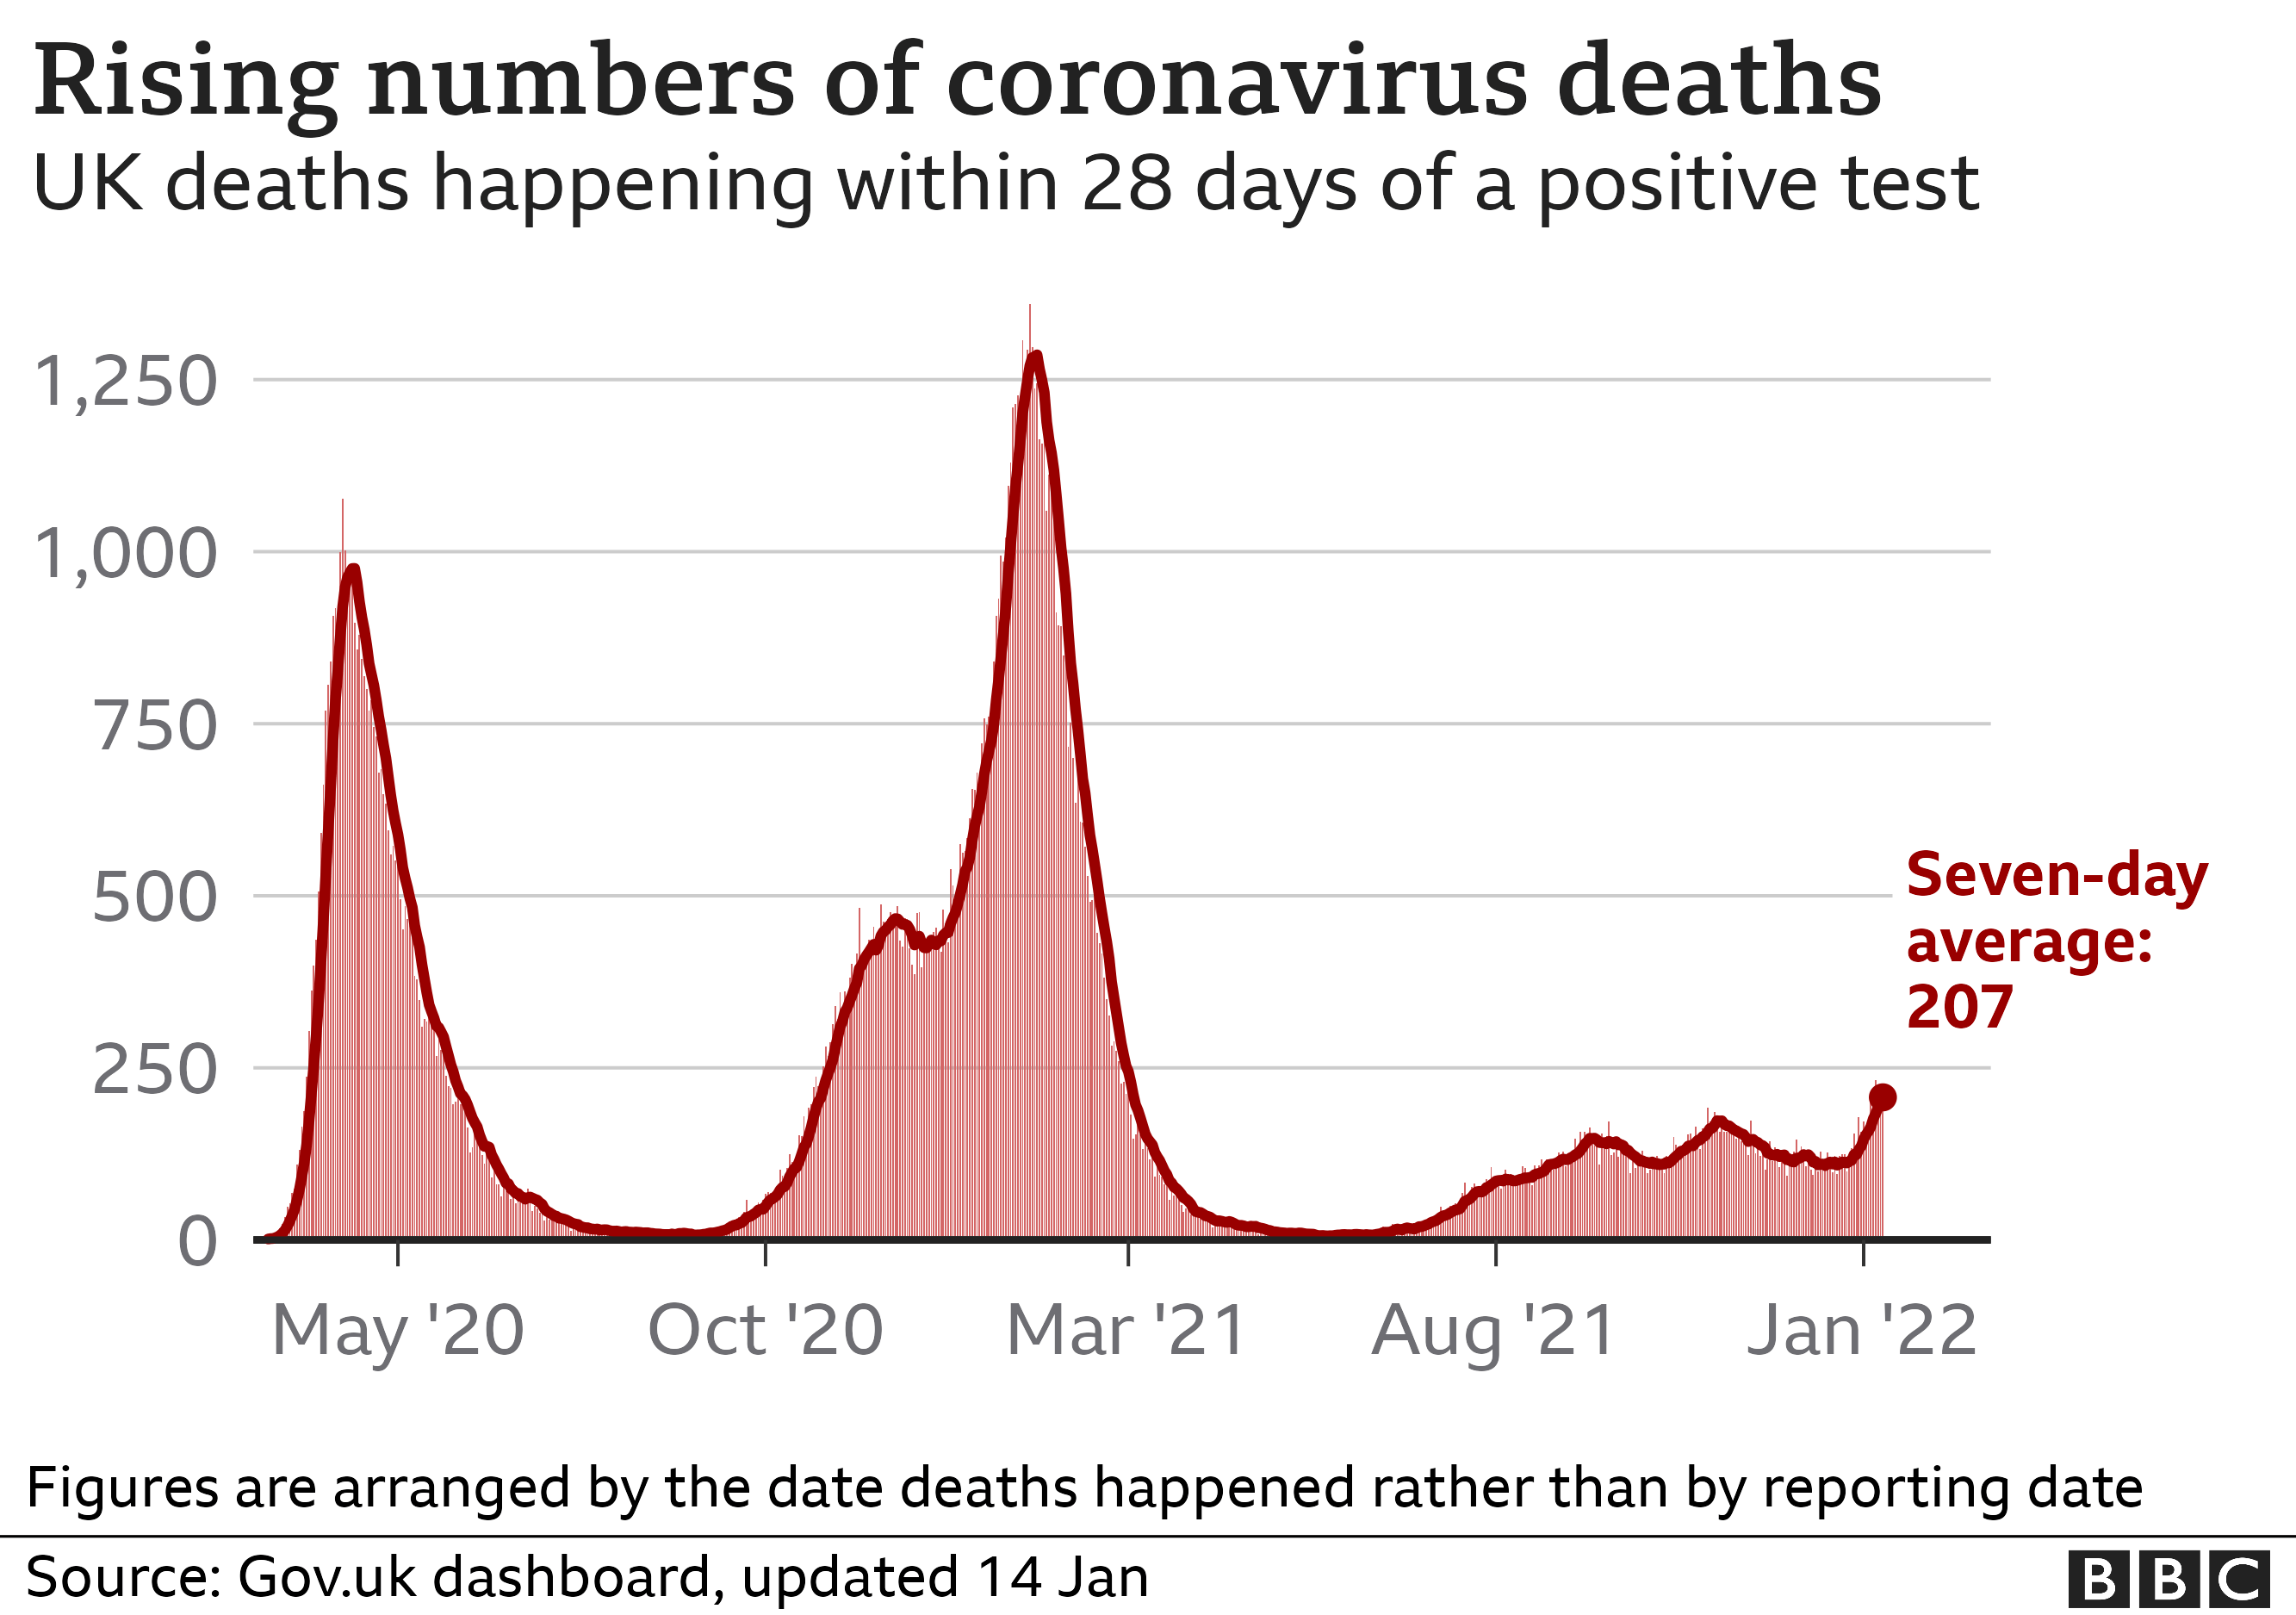 What's really going on with Covid deaths data? - 